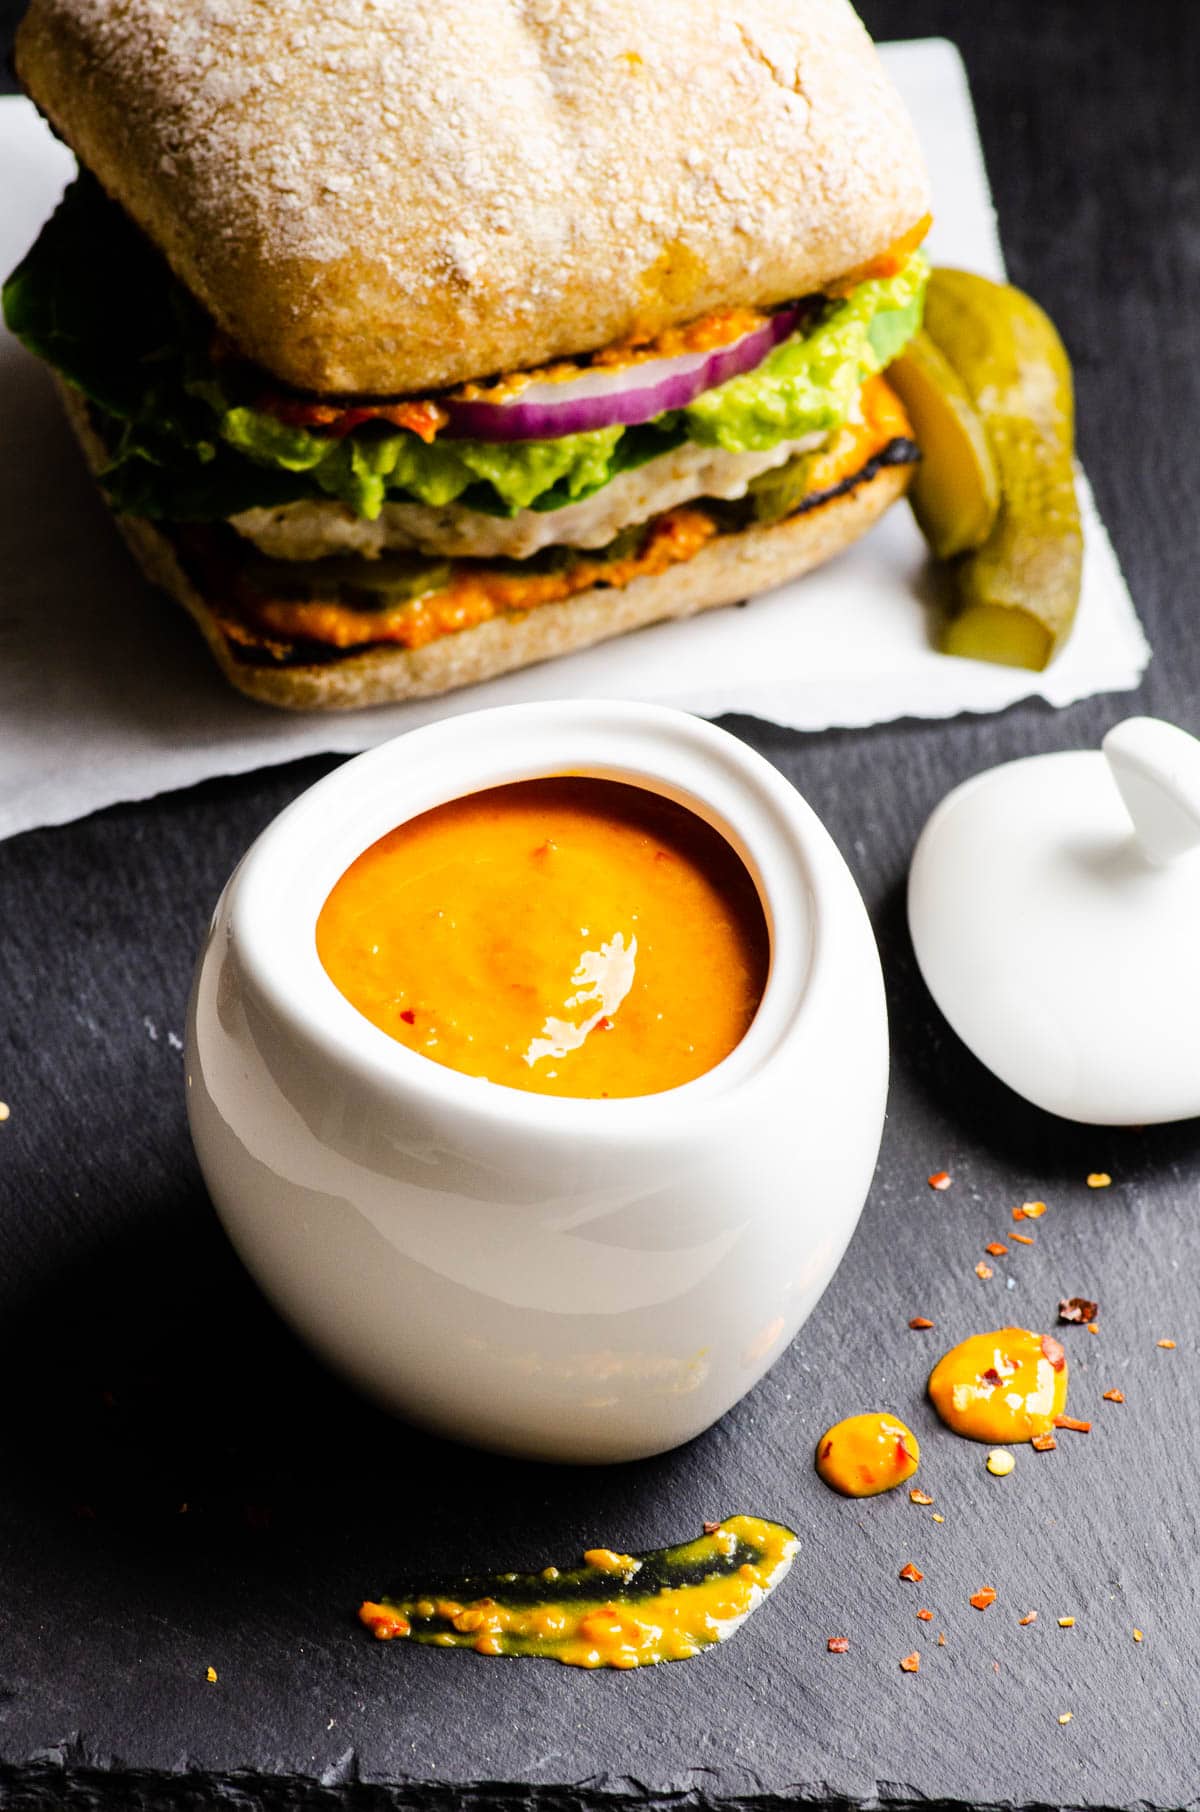 Sweet and spicy mustard in white jar. Burger and pickle on a side.